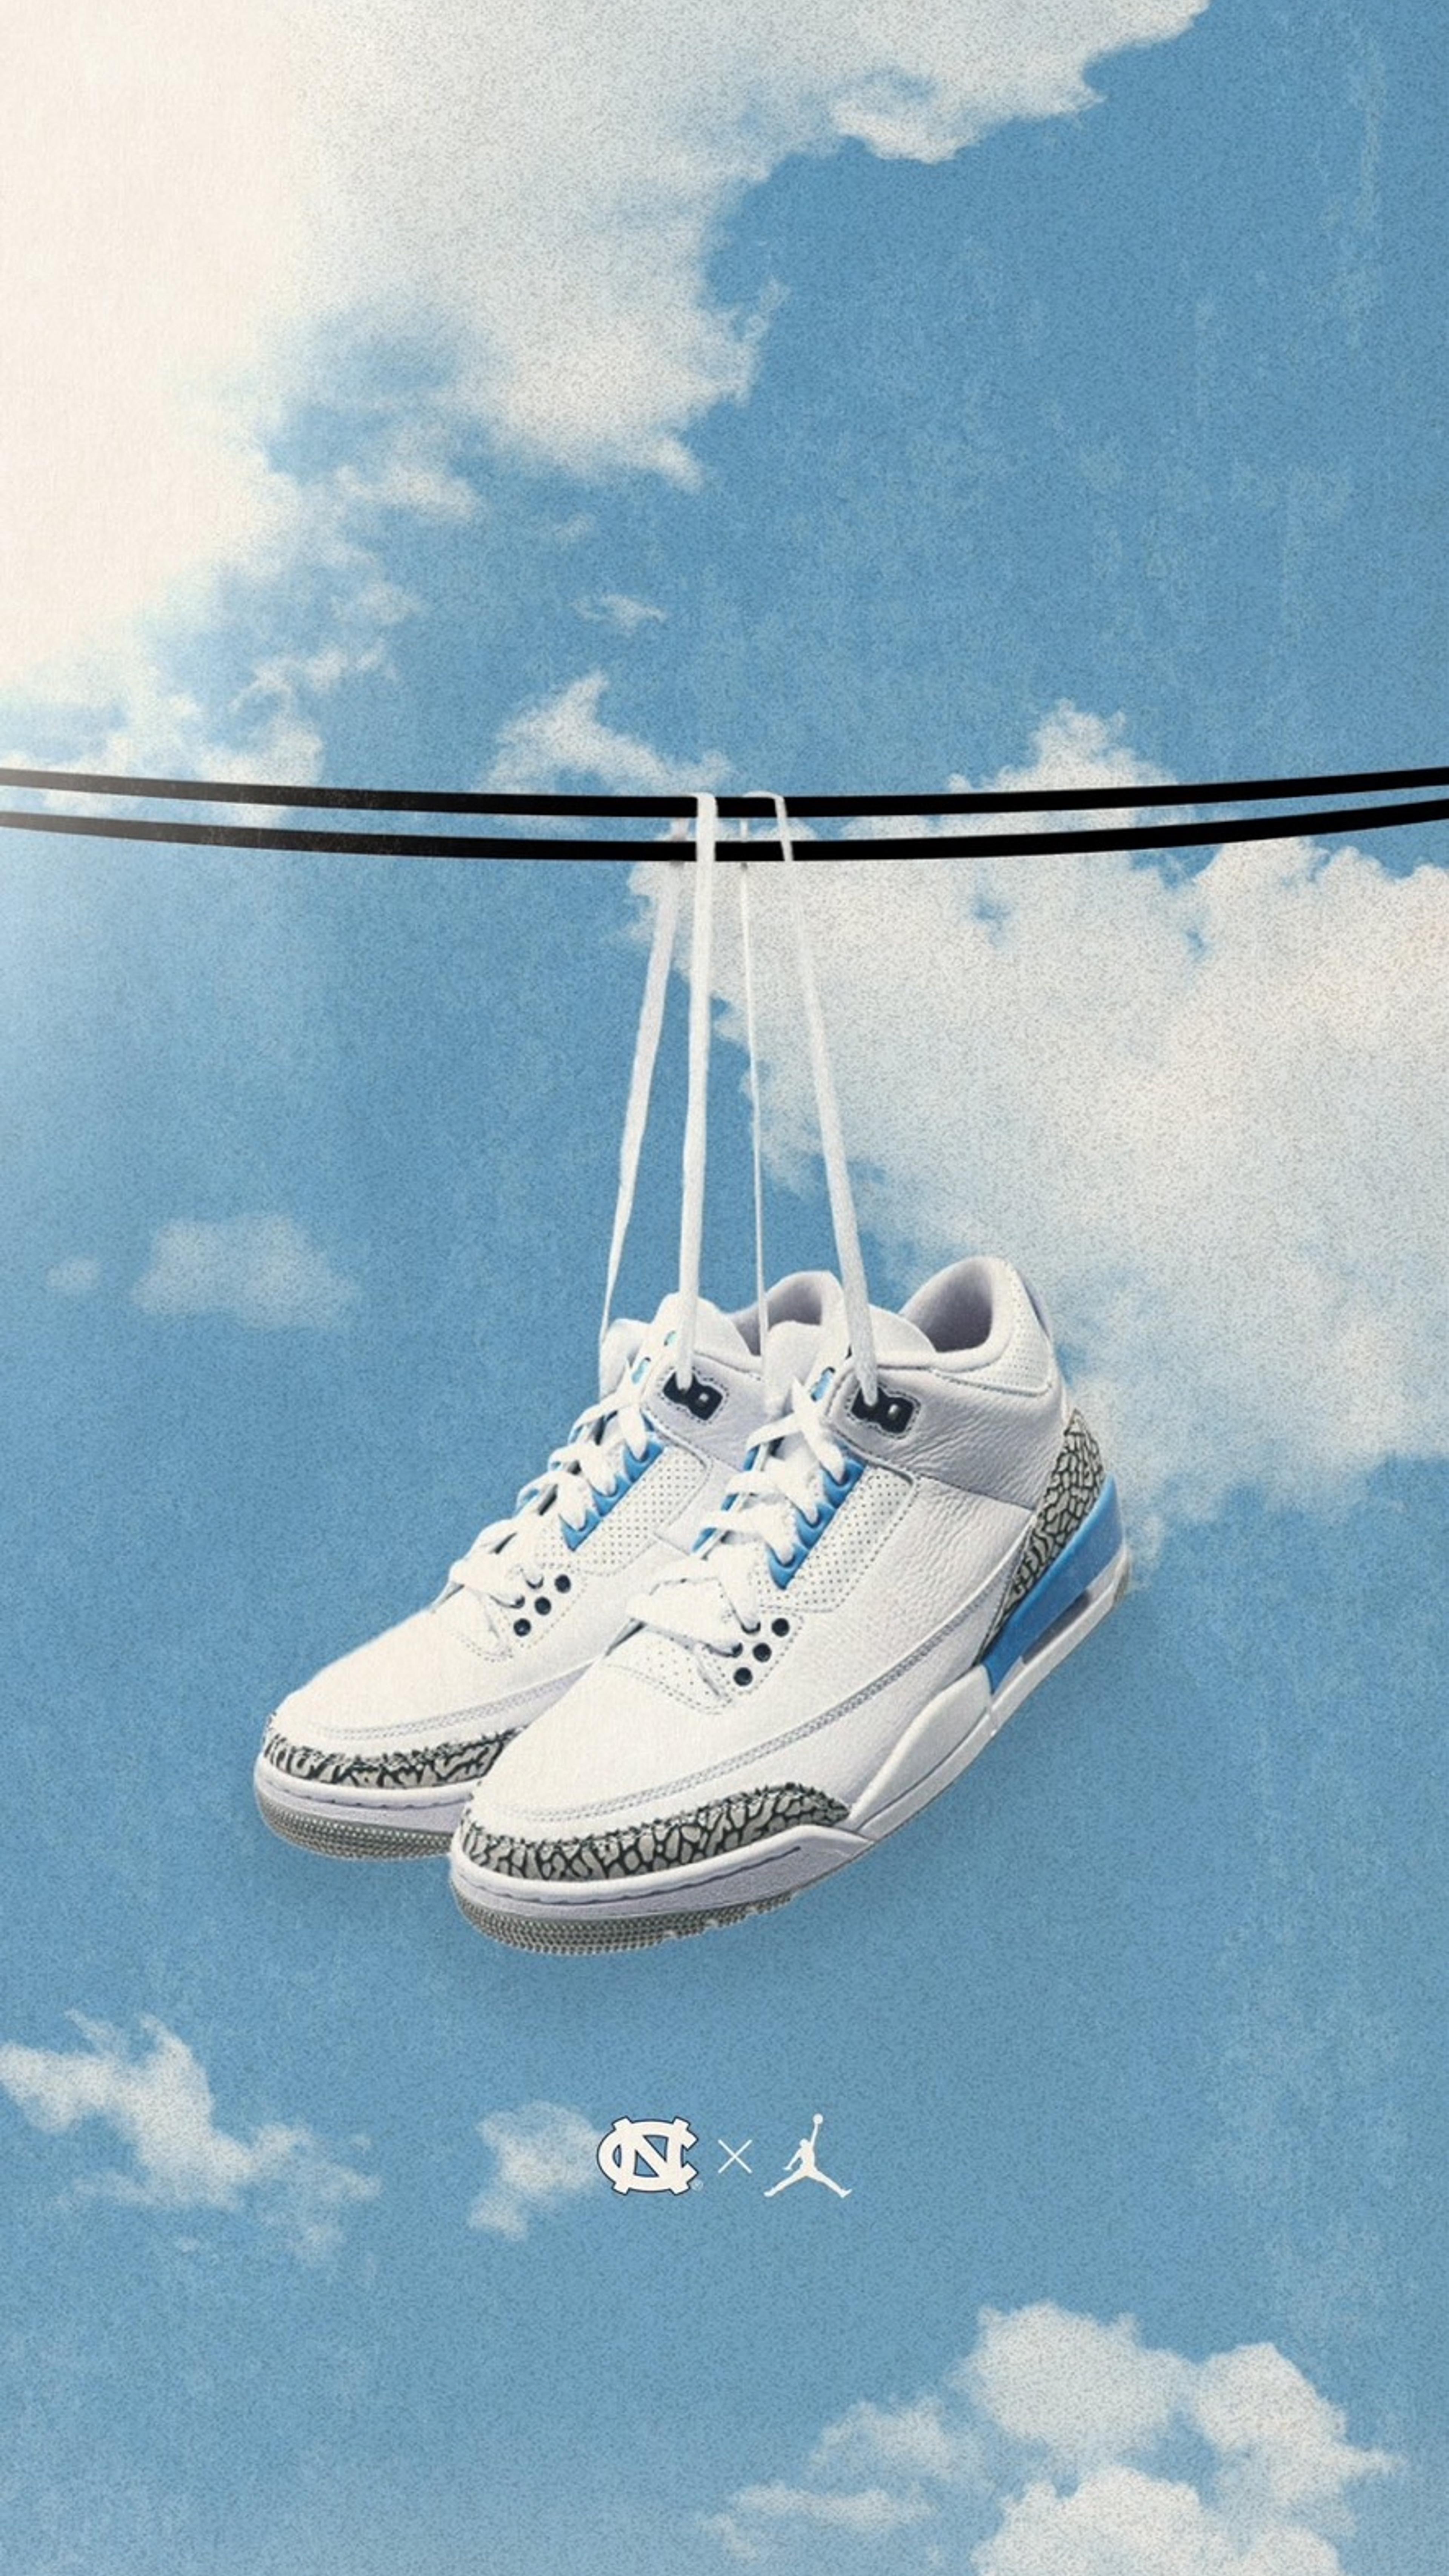 Preview image for the show titled "Mystery wheel - ANY SIZE DS JORDAN 3 UNC!!! INSTA HITS!!" at May 9, 2024